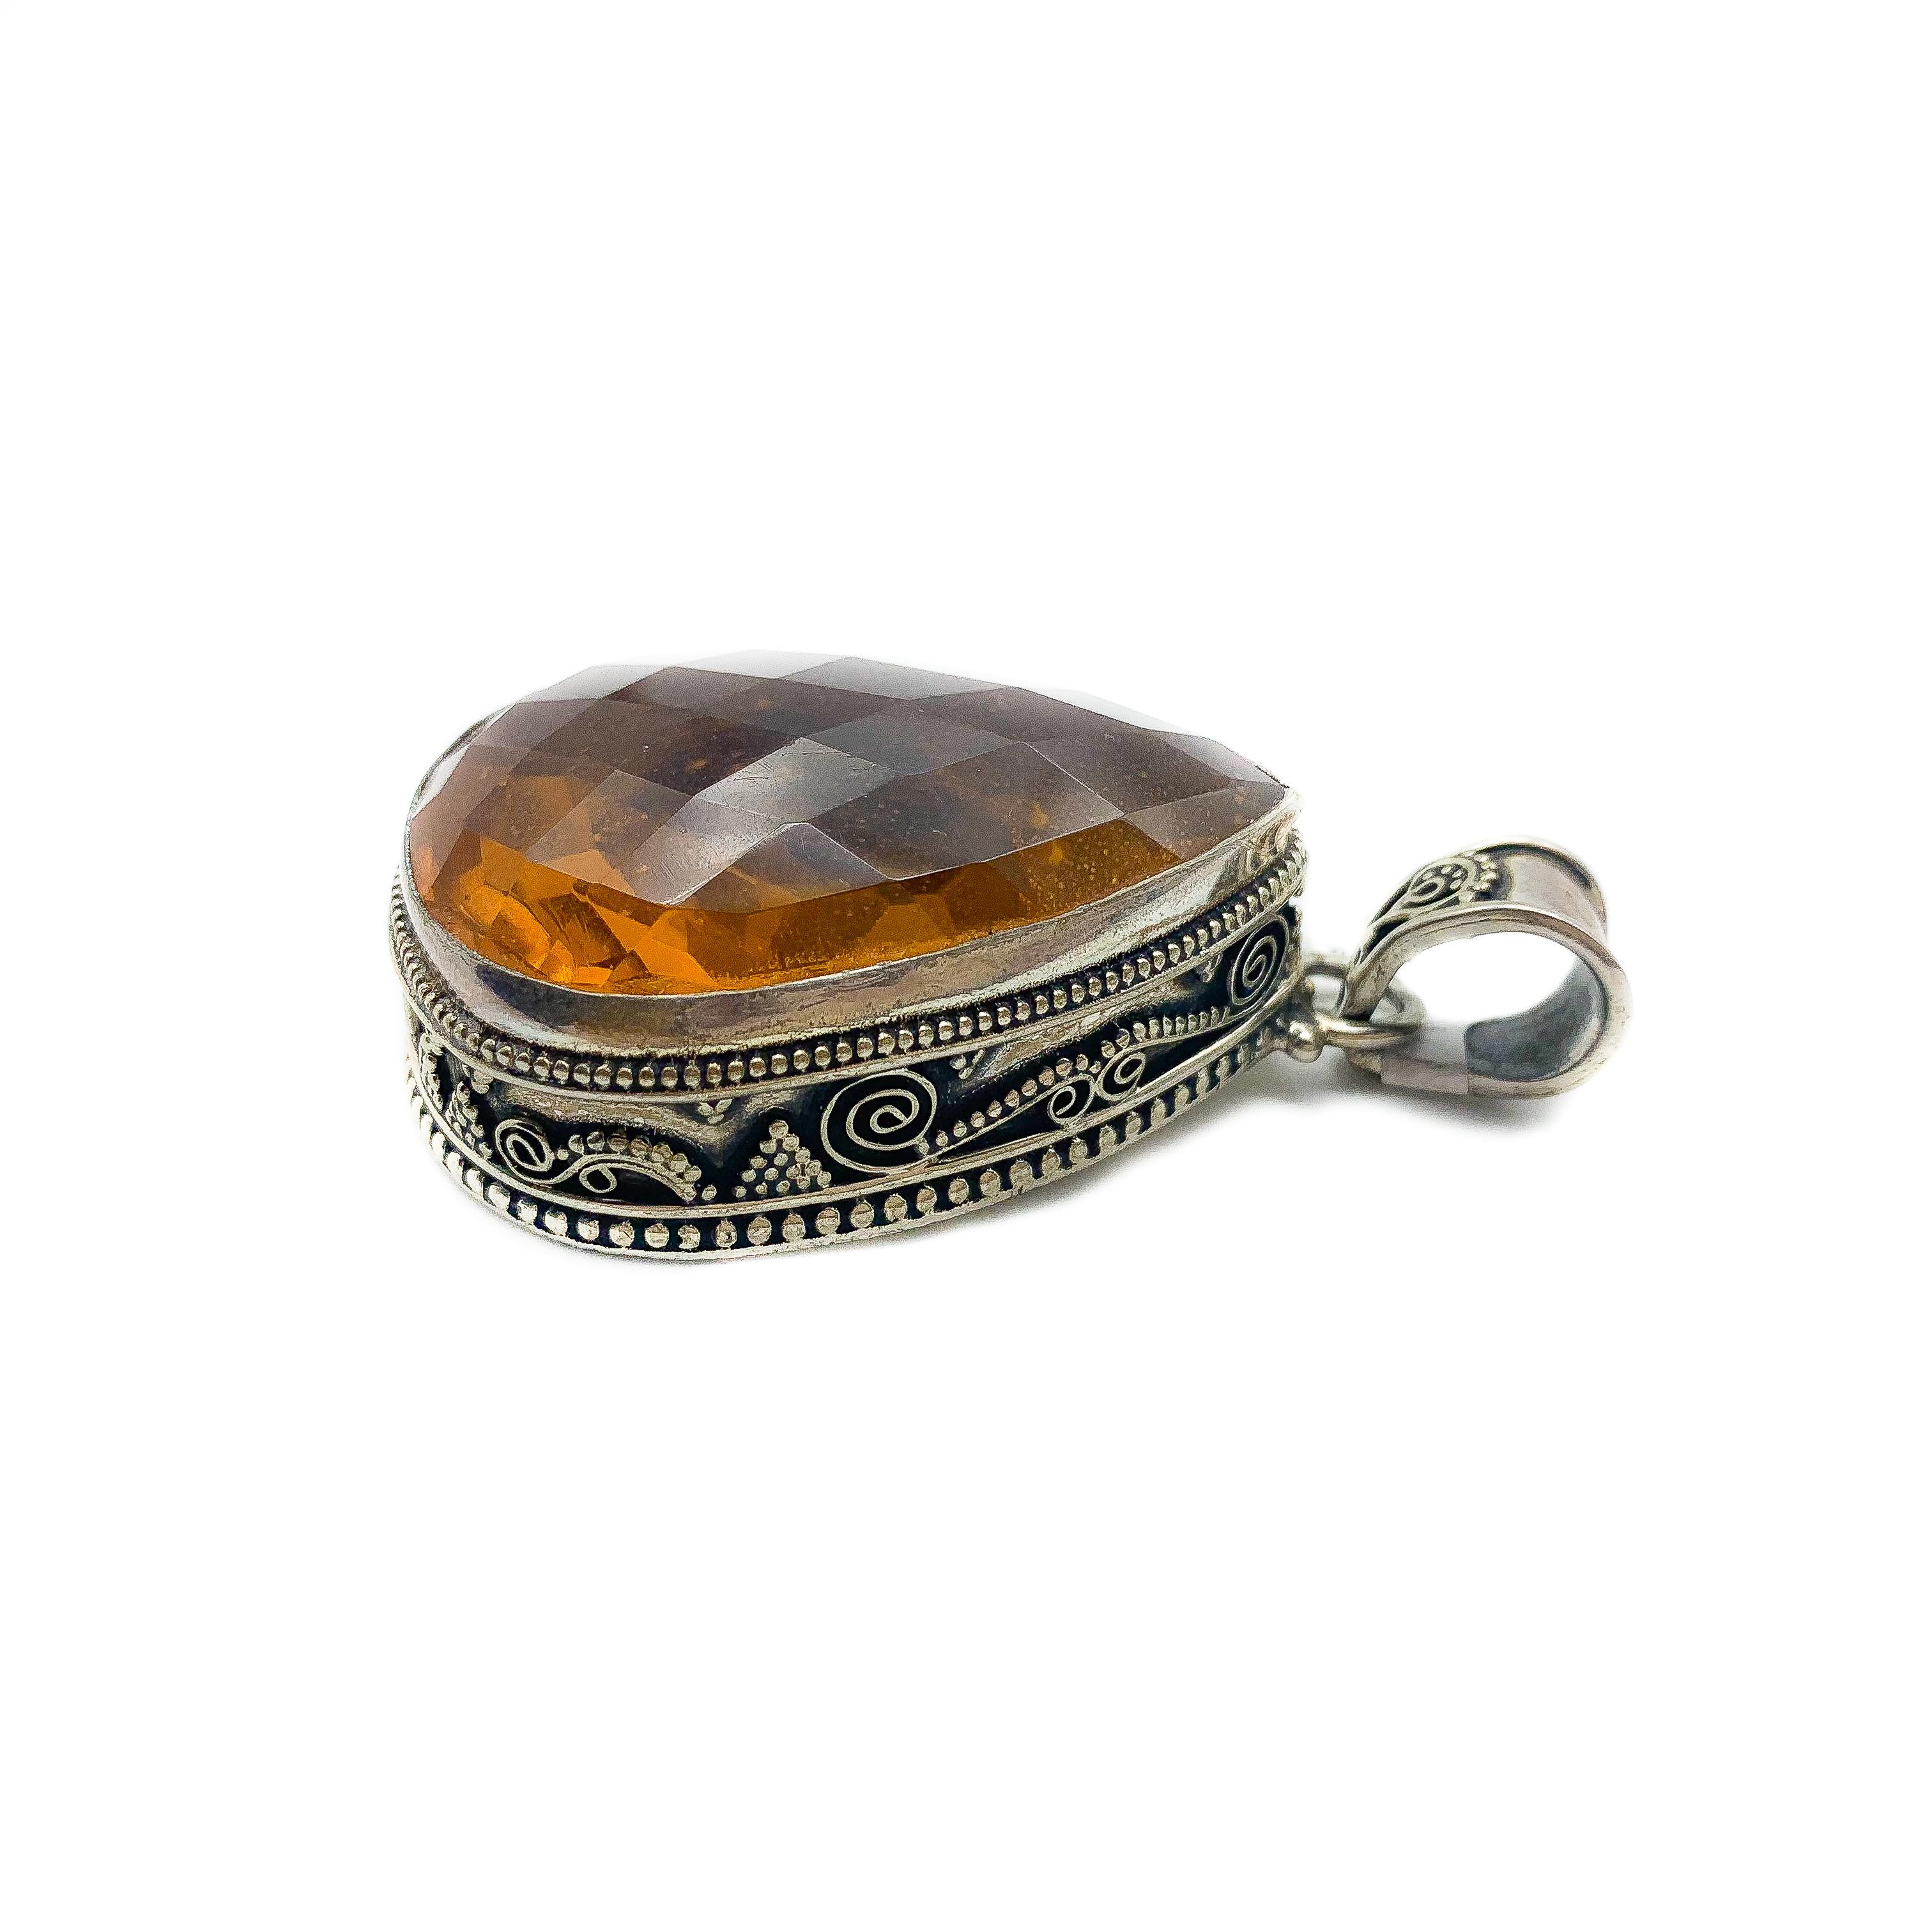 125 Carats Citrine & Sterling Silver
Hand Made in Bali 
Accessory
